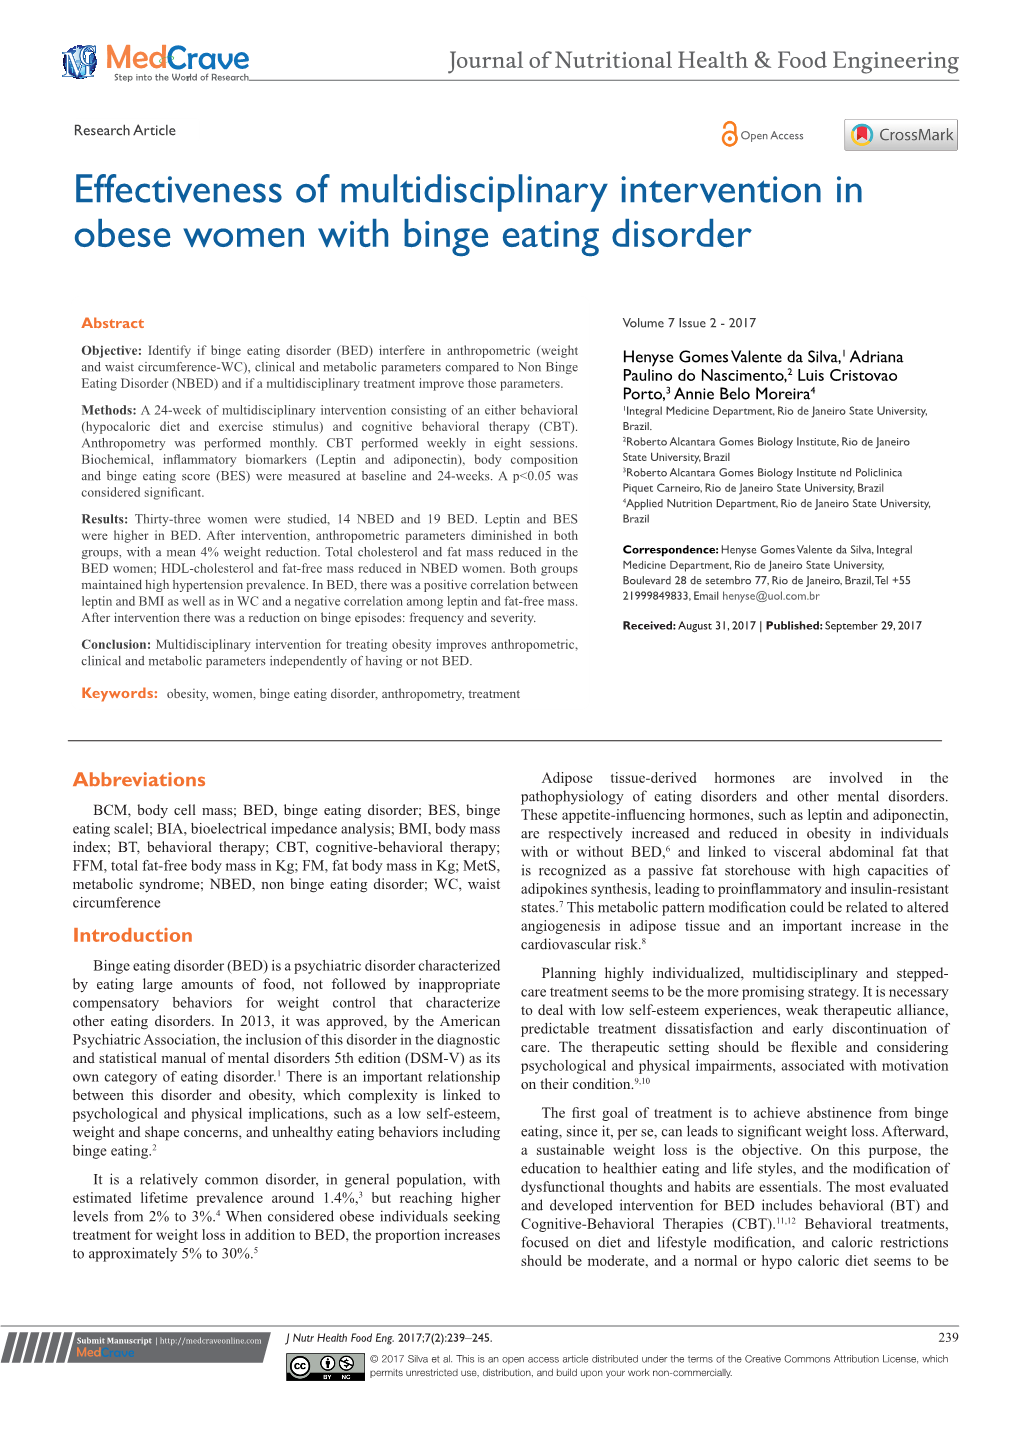 Effectiveness of Multidisciplinary Intervention in Obese Women with Binge Eating Disorder